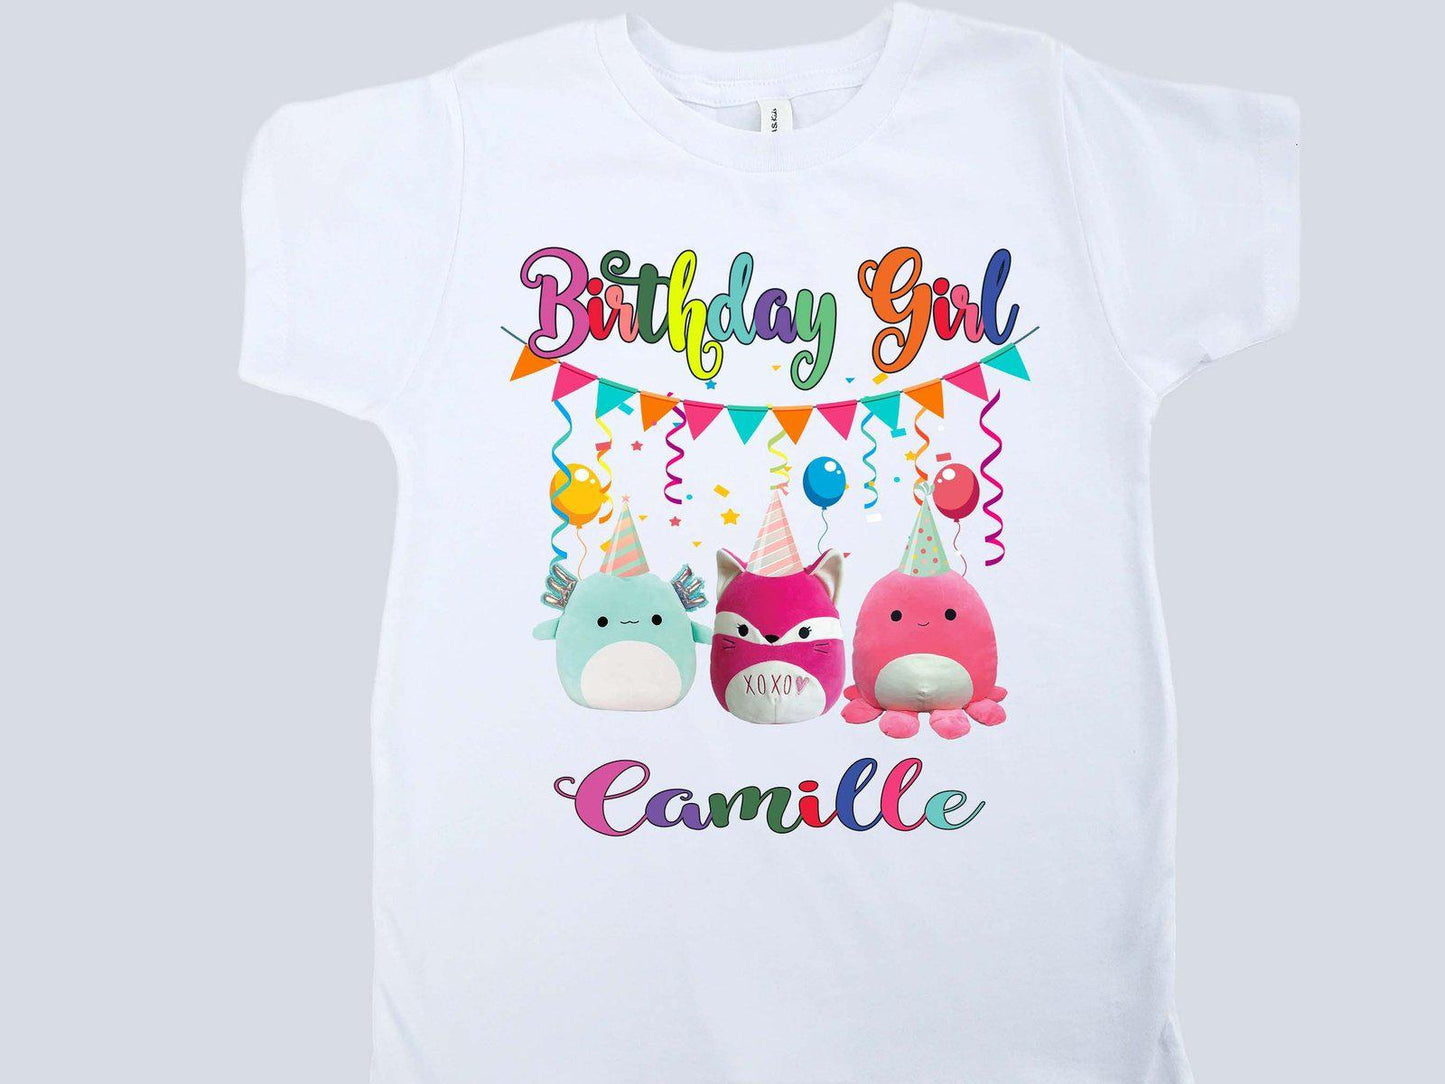 A white Squishmallows birthday shirt with 'Birthday Girl' text and 3 squishmallows